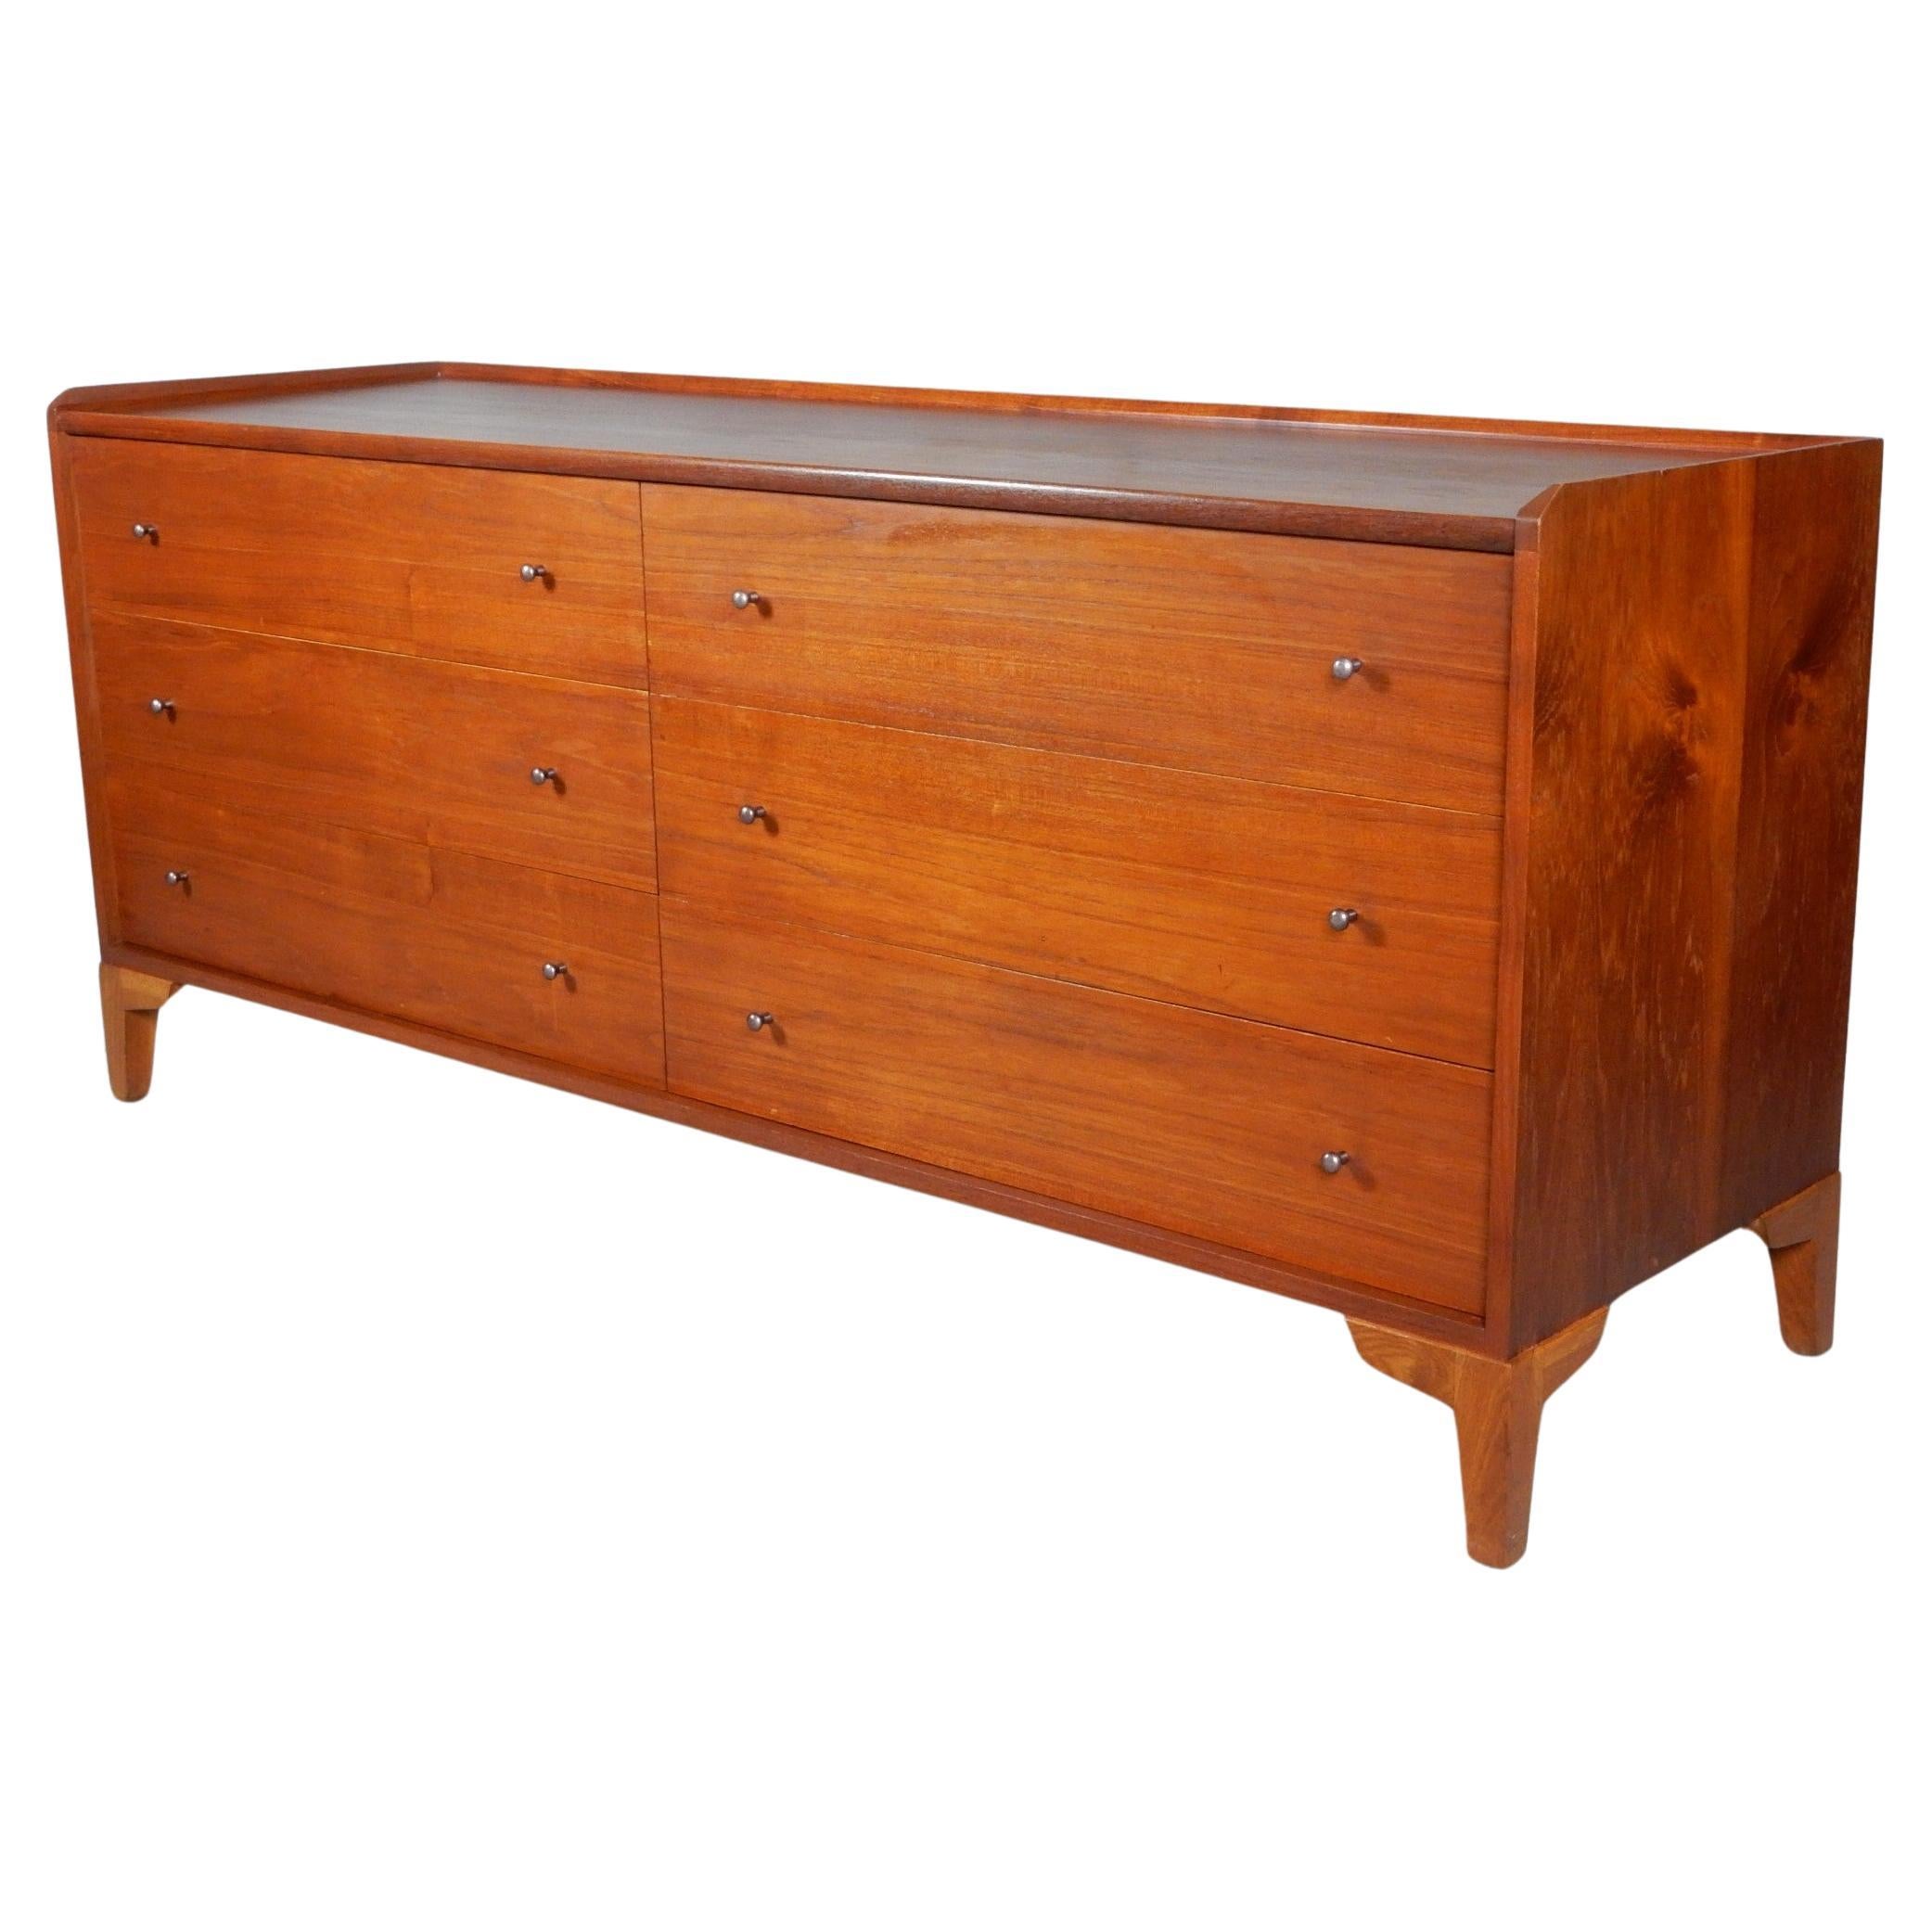 Mid-Century Modern Mid Century Walnut Low Chest of Drawers by Charles Pechanec 1950's For Sale